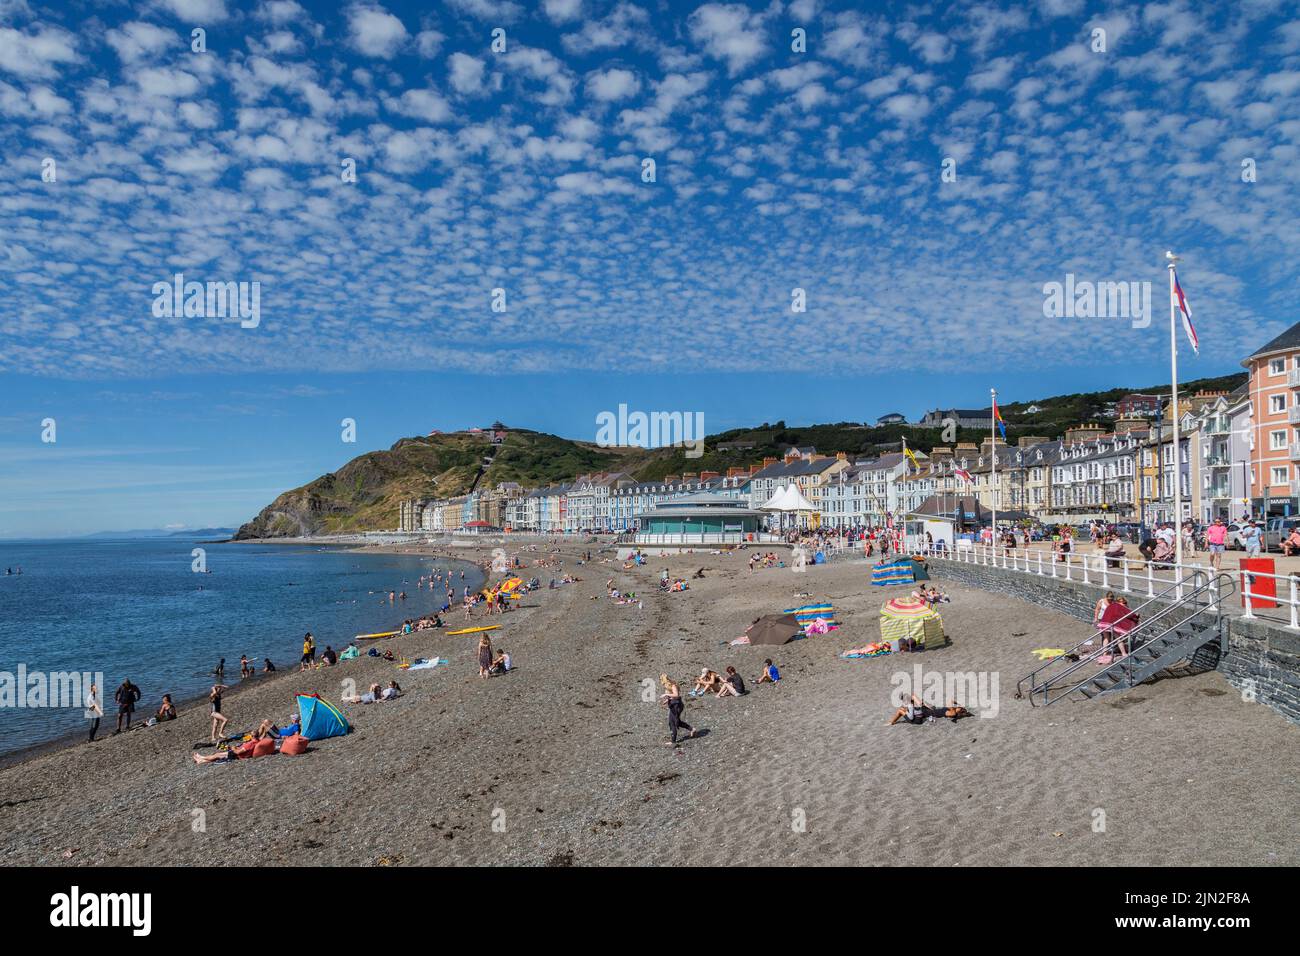 A view of the beach, promenade and Constitution Hill at the Welsh seaside town of Aberystwyth. Stock Photo